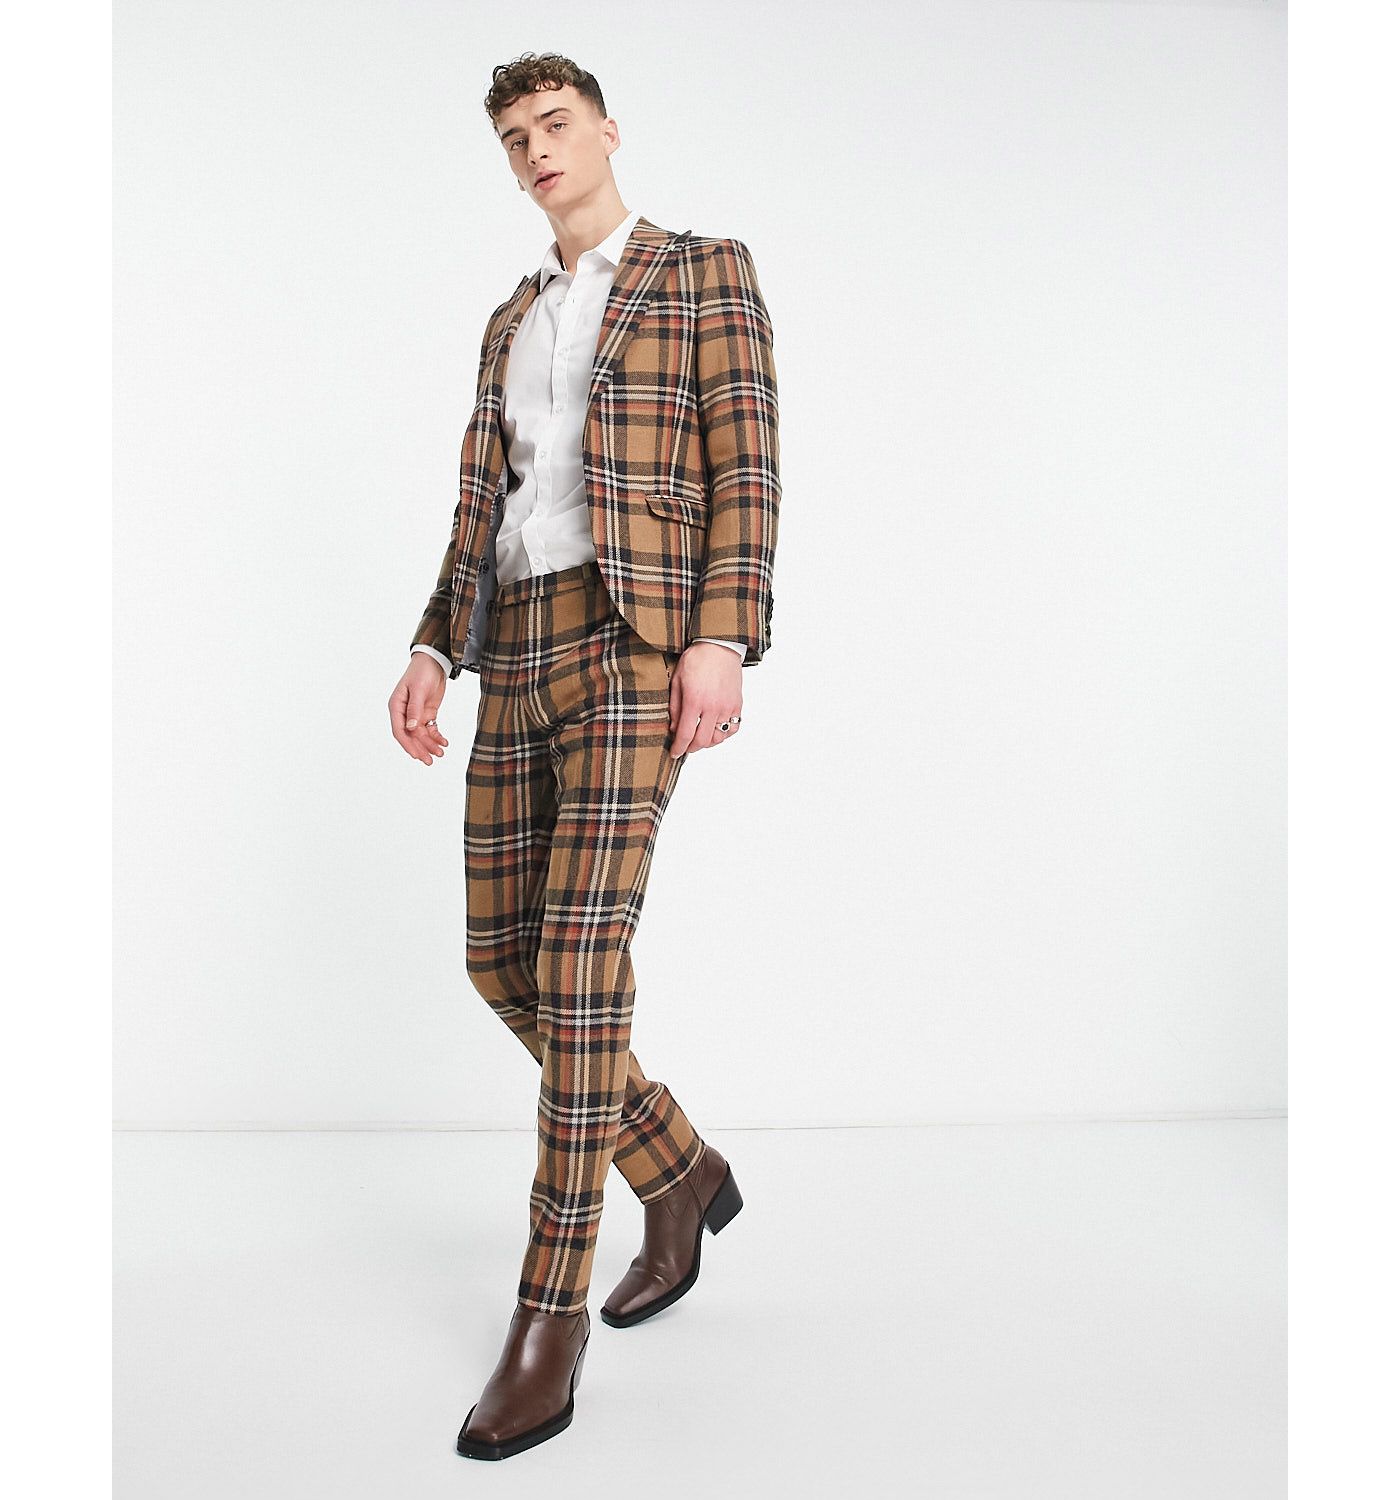 Twisted Tailor nevada skinny suit jacket in beige and blue tartan check